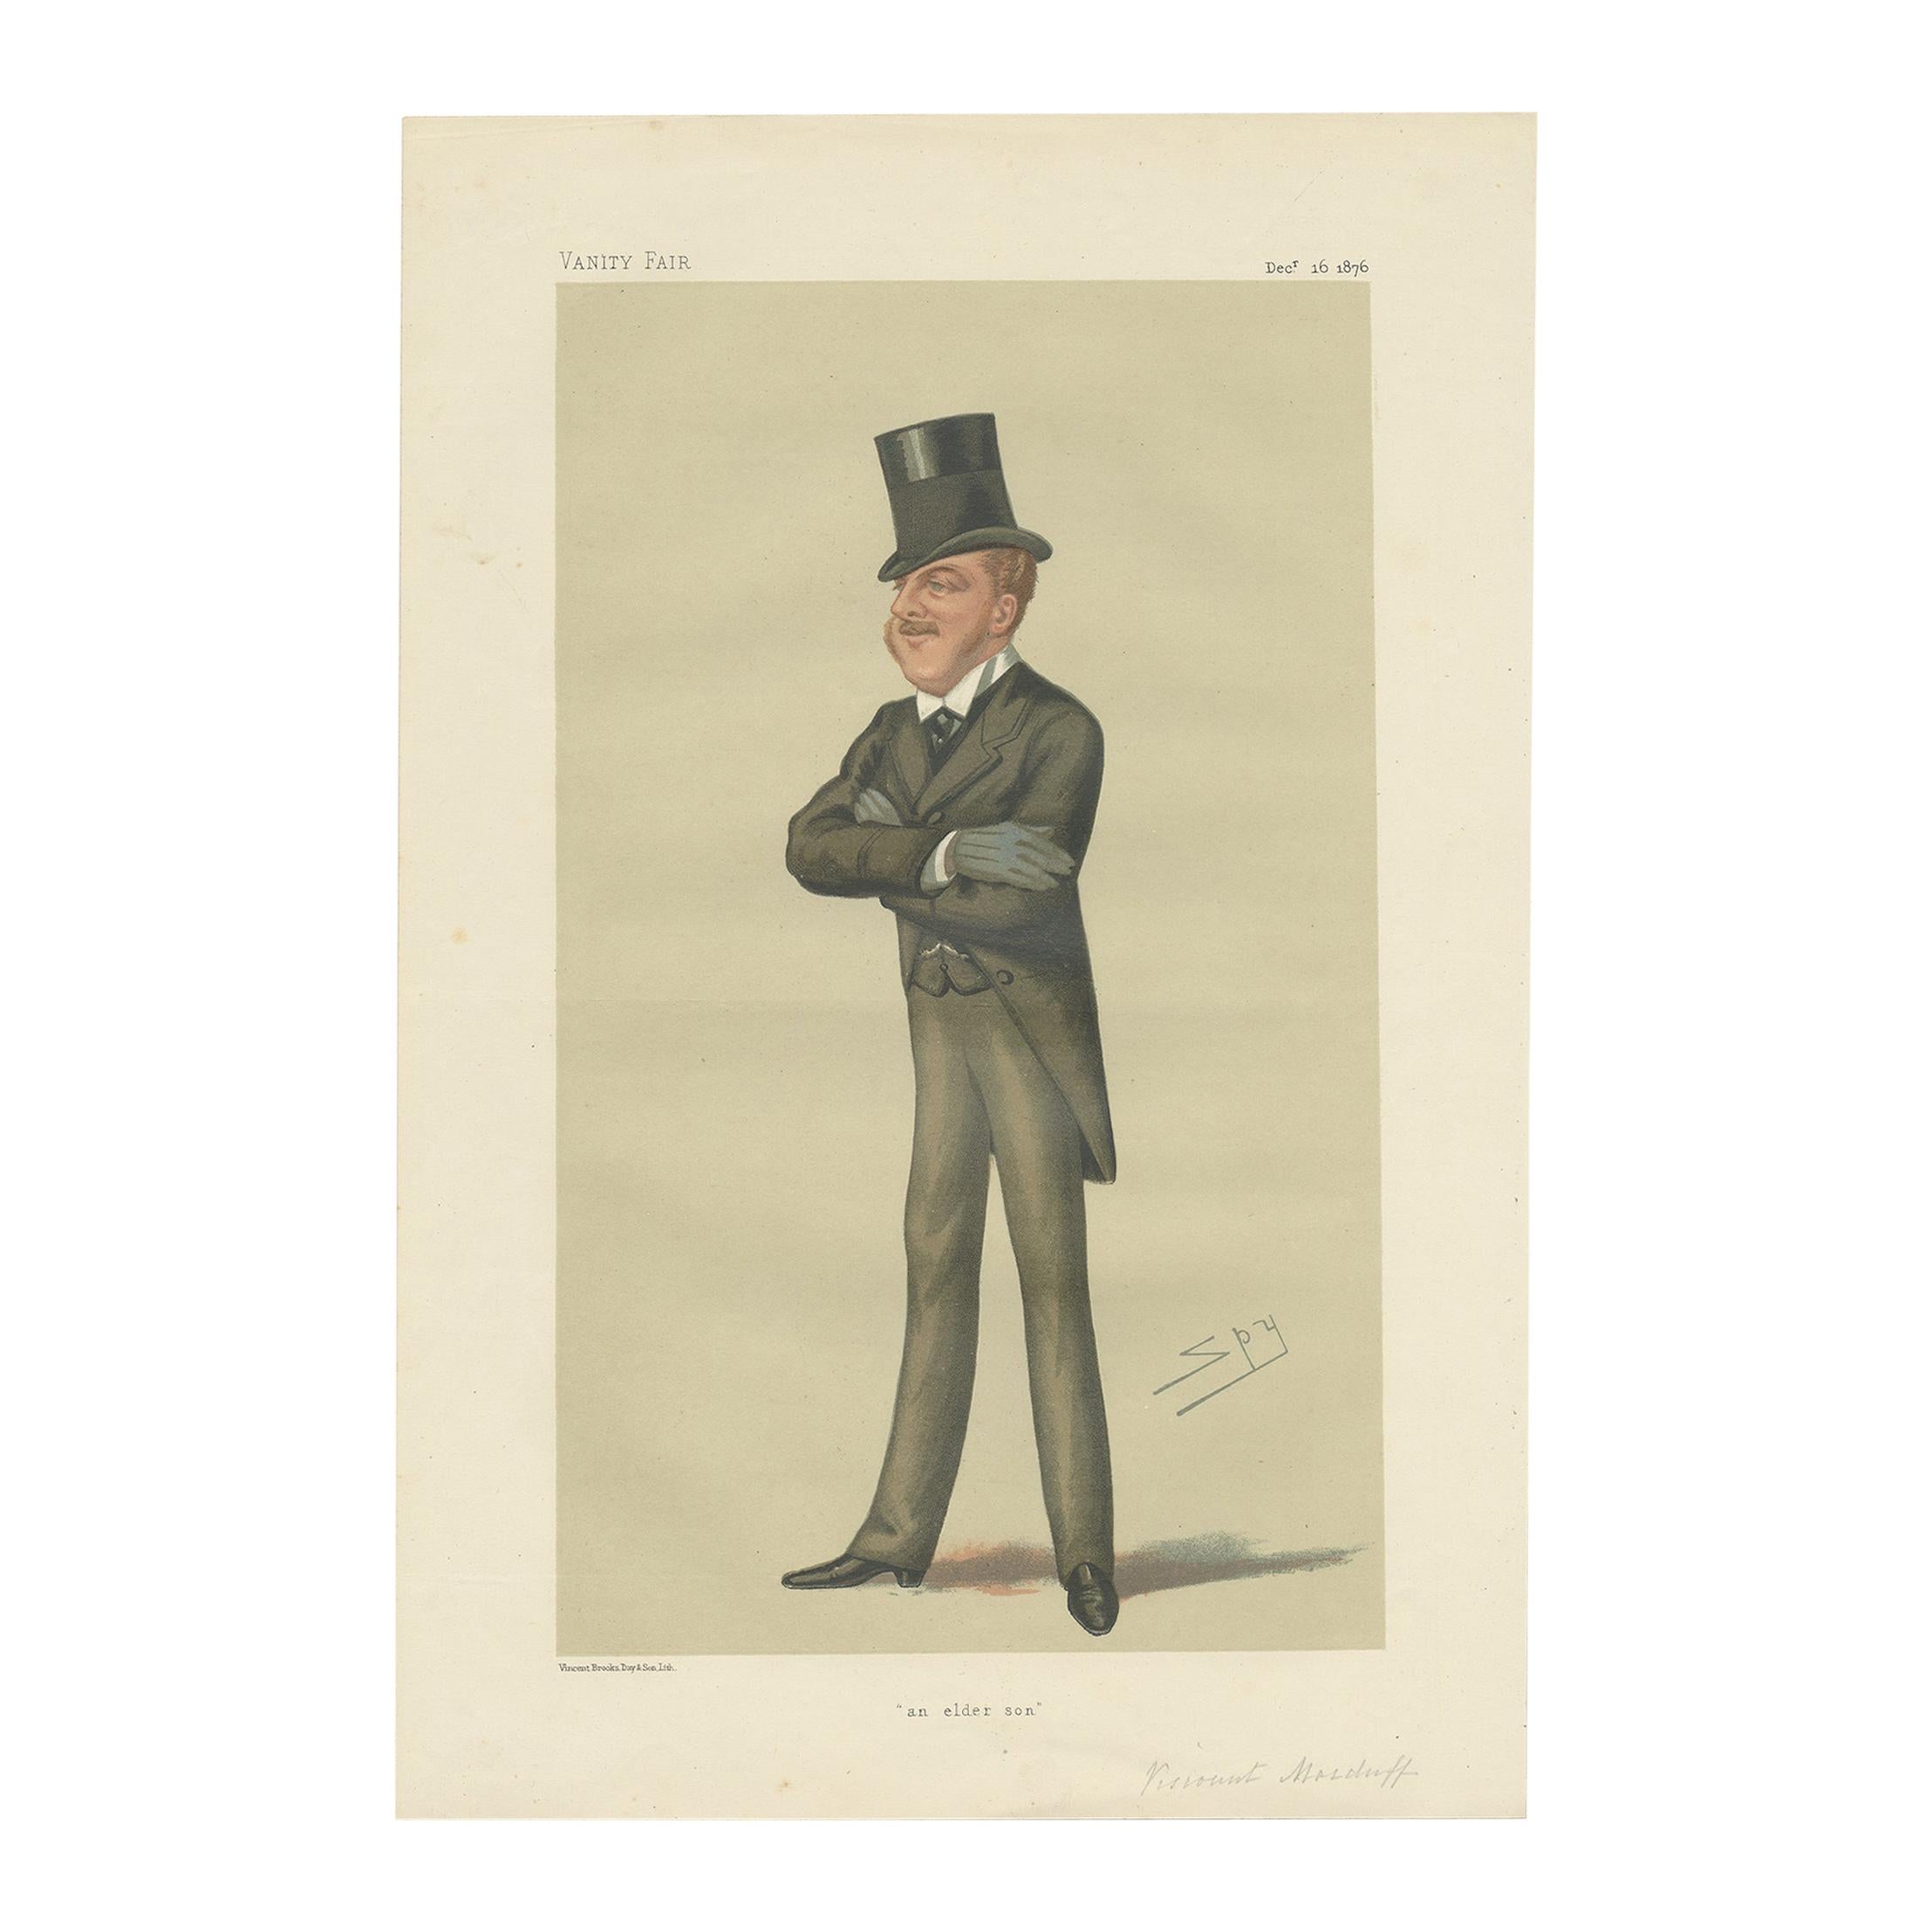 Antique Print of Viscount Macduff Published in the Vanity Fair, 1876